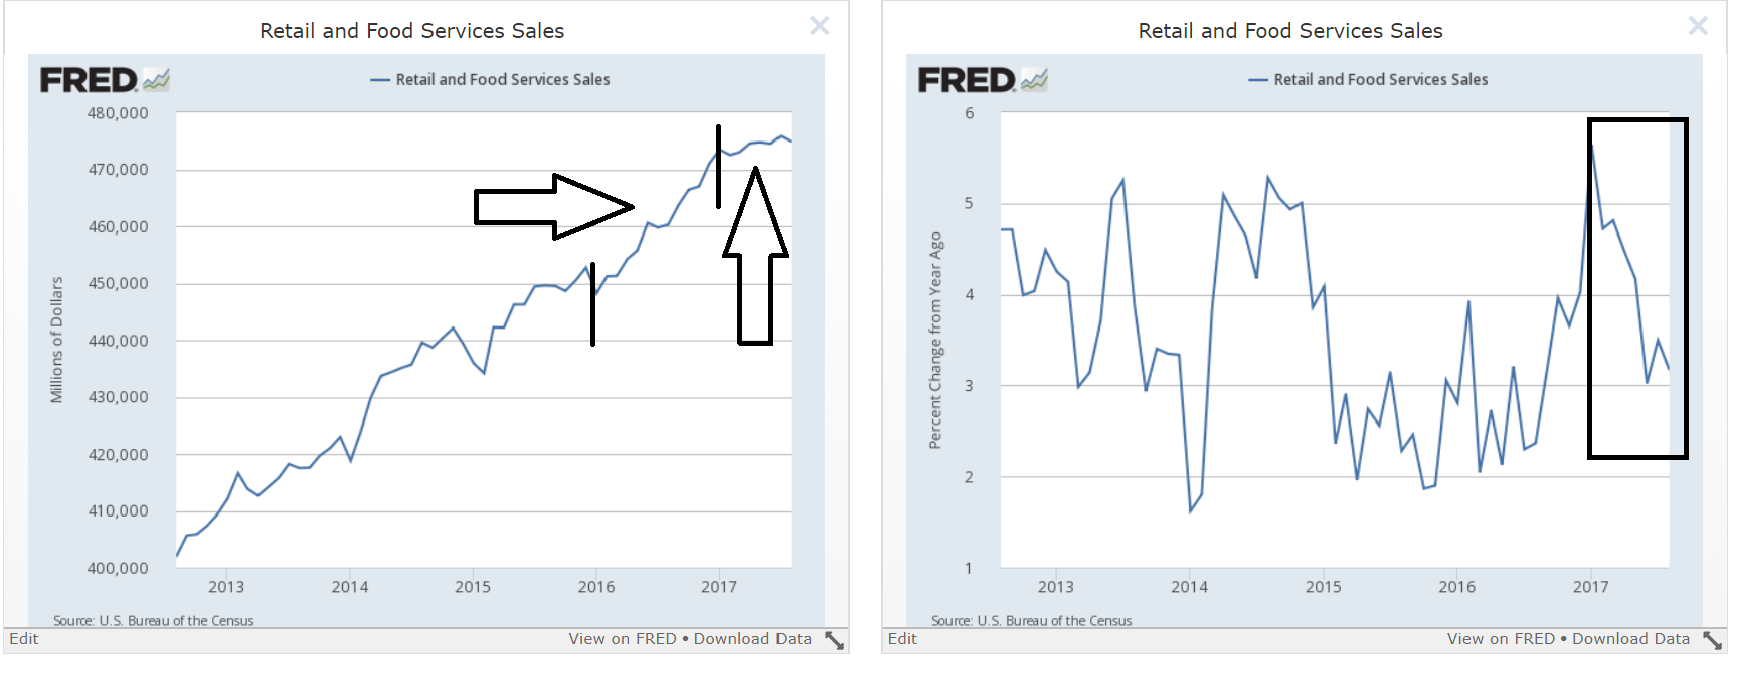 Retail And Food Services Sales s012-2017: By $ and % Change